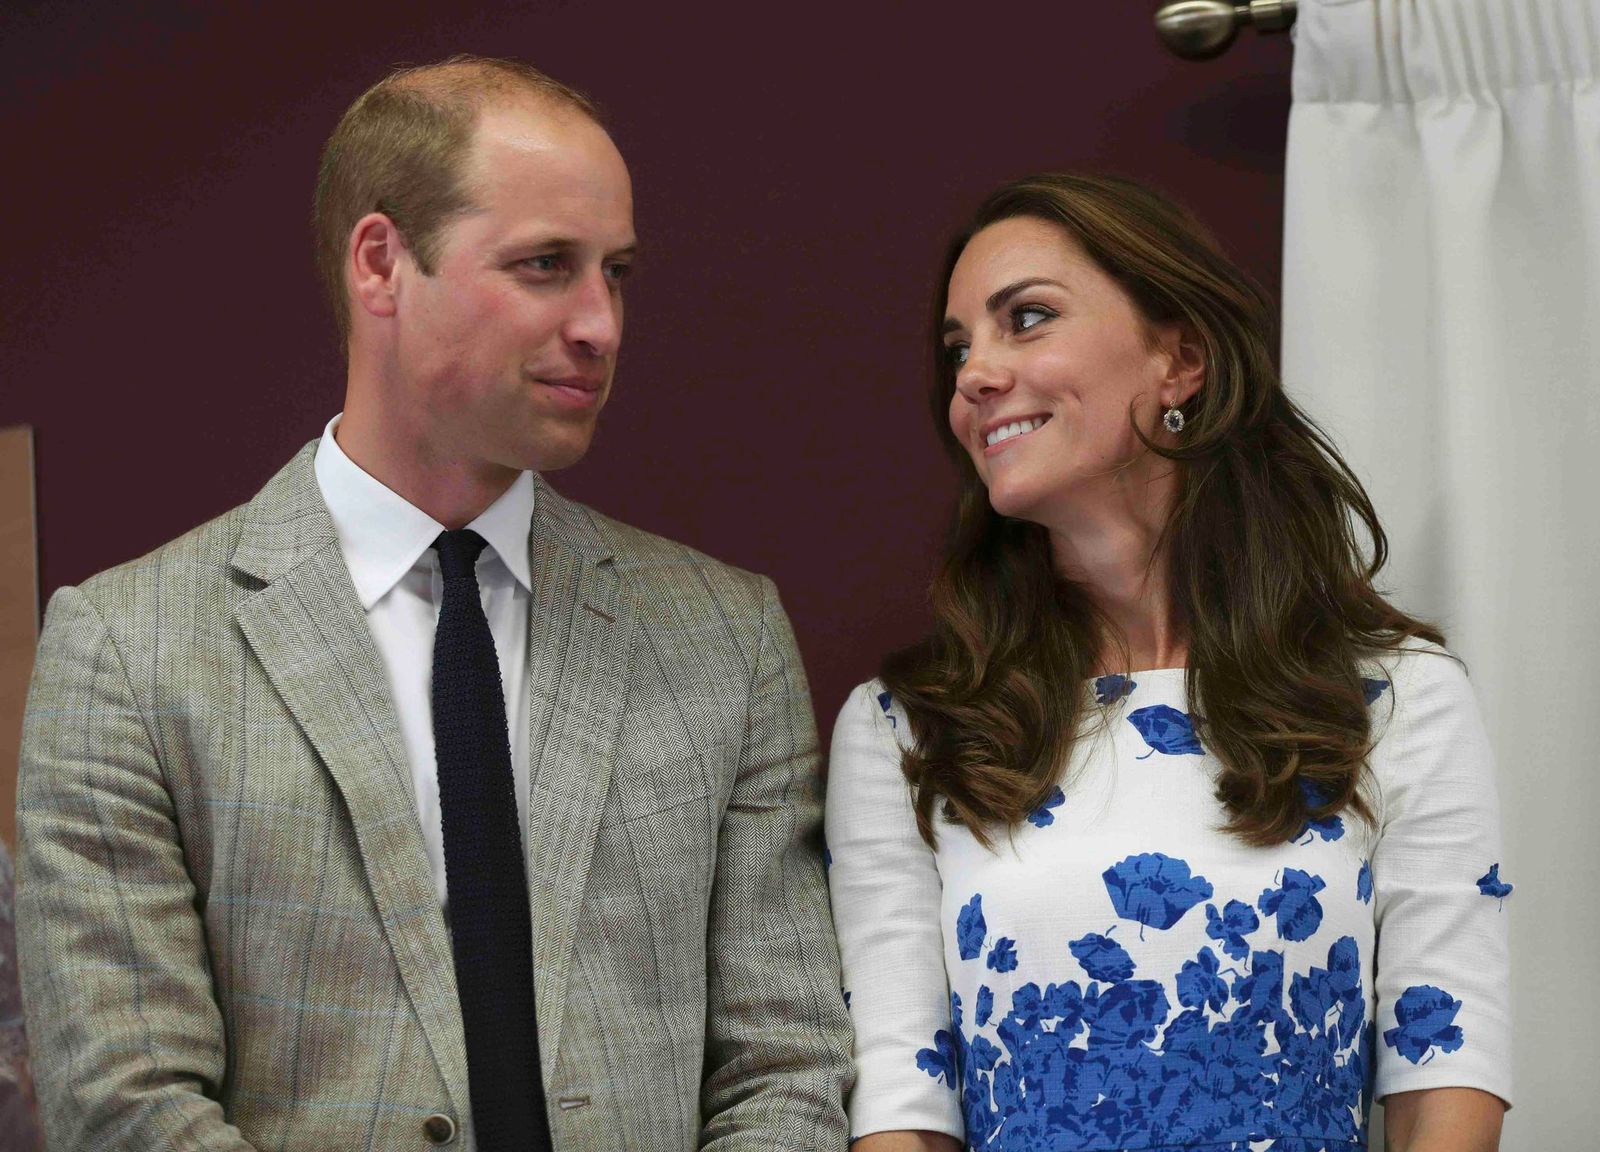 Kate Middleton and Prince Willaim listen to a speech during their visit to Keech Hospice Care on August 24, 2016. | Getty Images